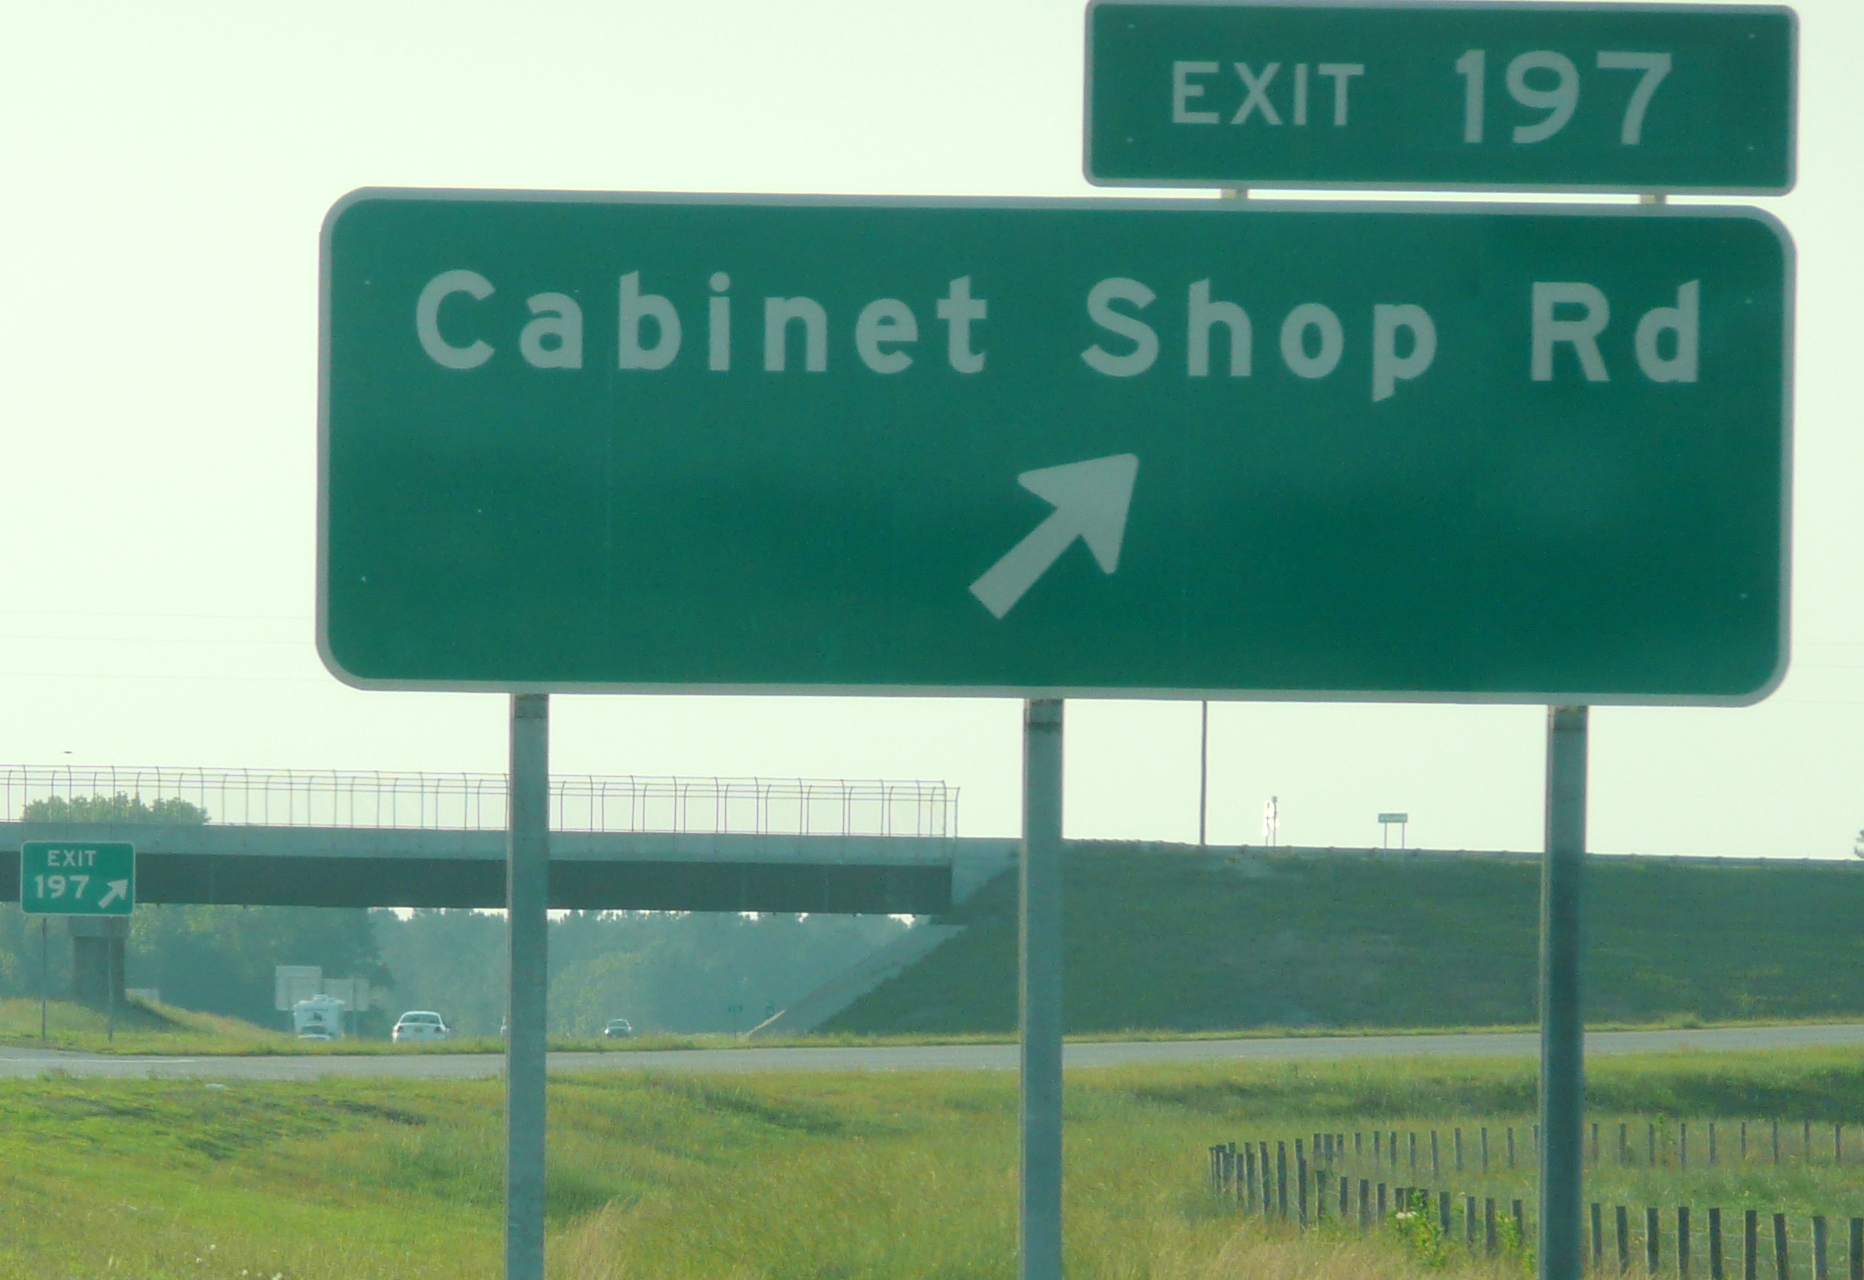 Photo of the exit signage for the Cabinet Shop Rd interchange showing the correct 
exit number, courtesy of James Mast